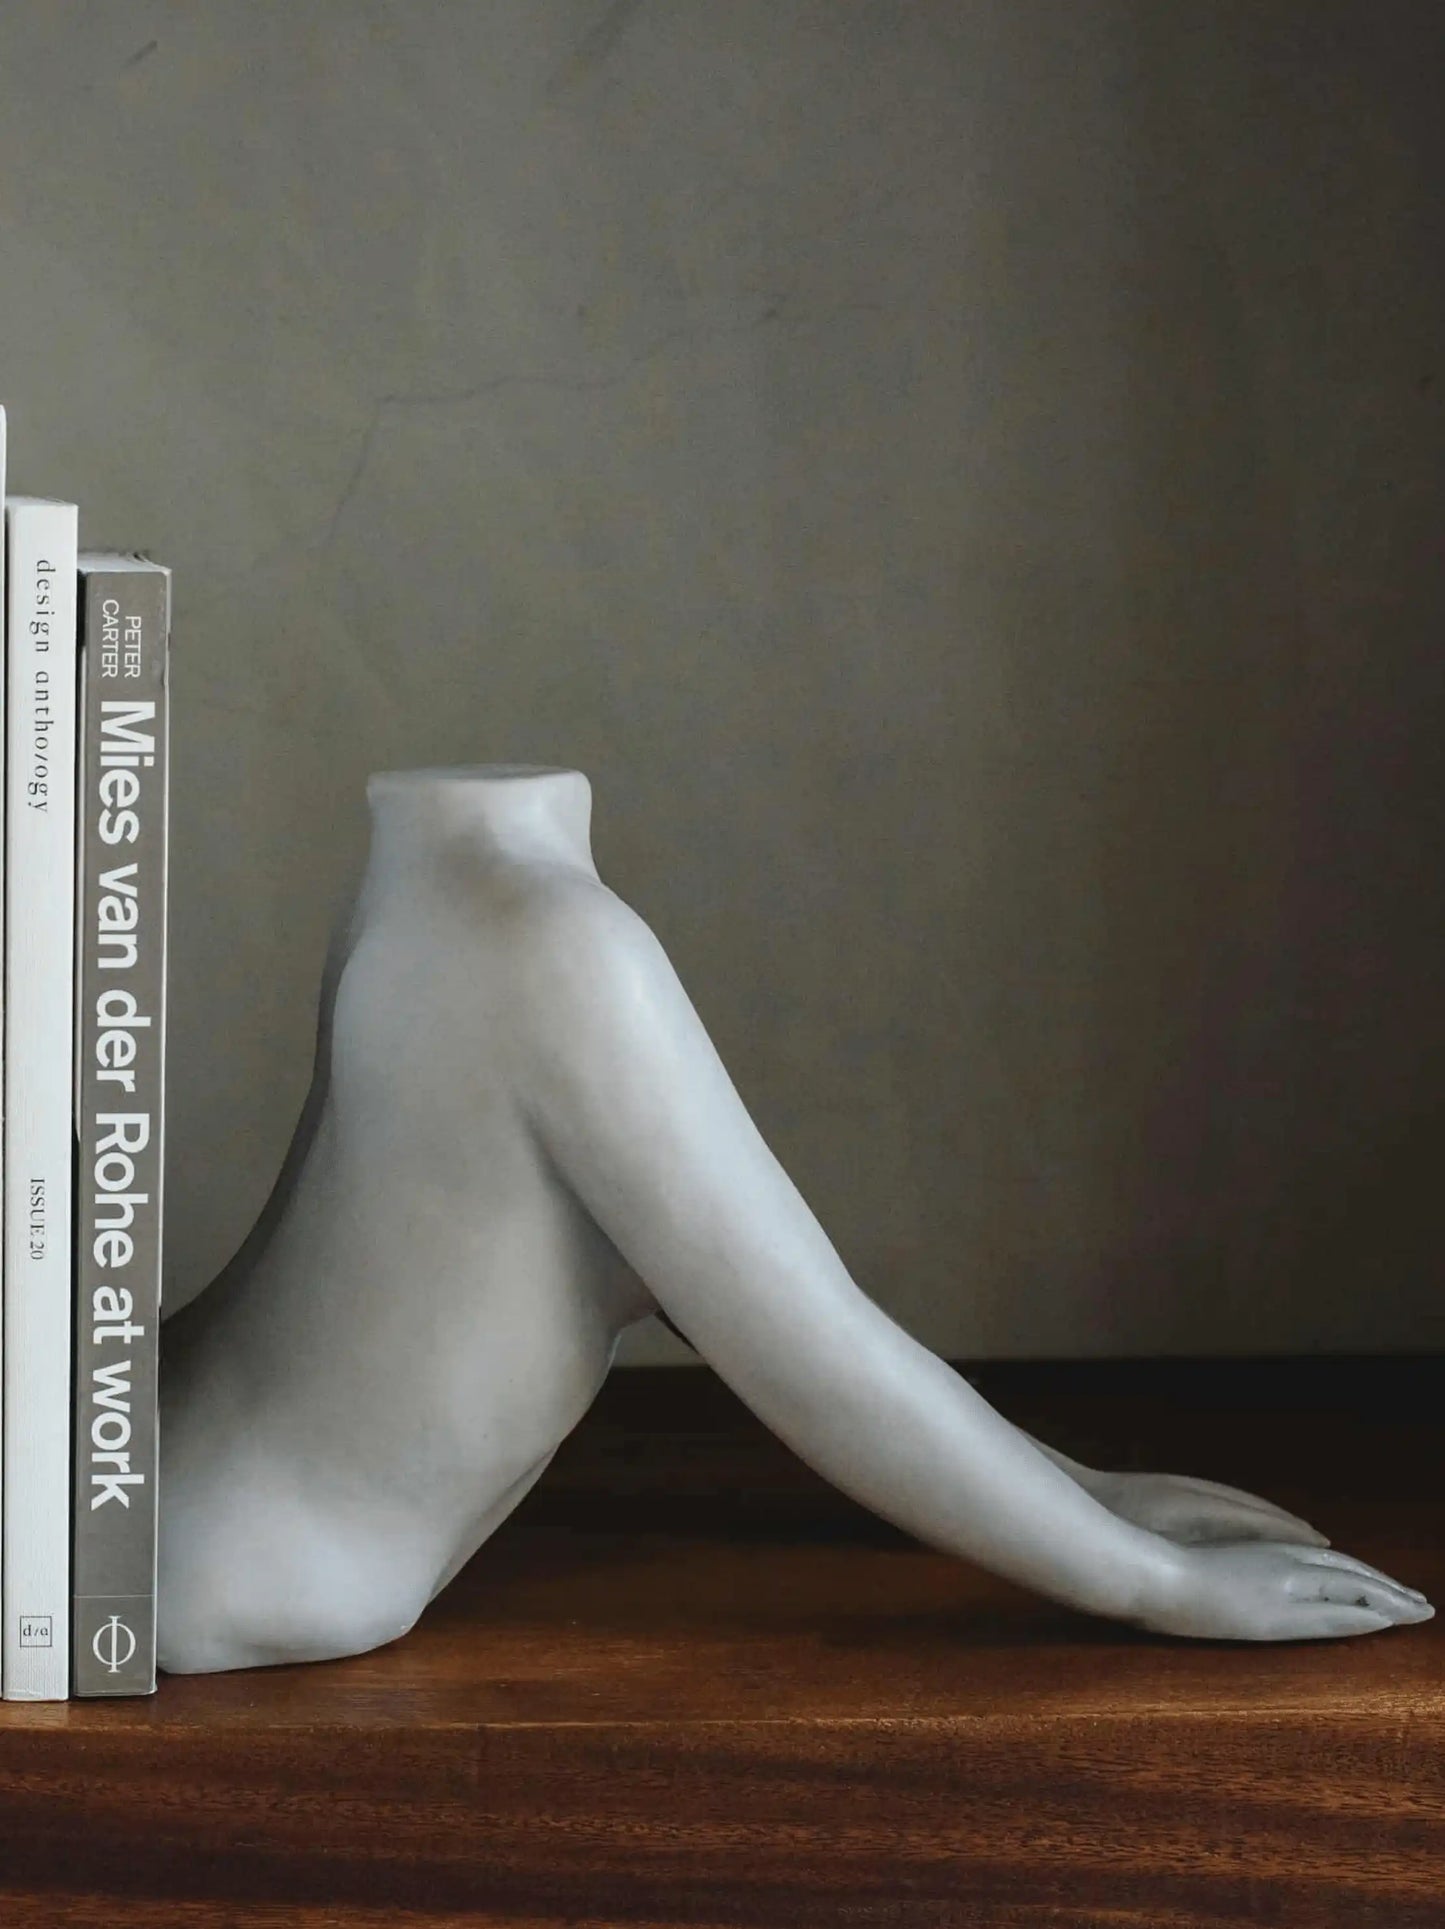 Stone Sculpture Pose Bookends